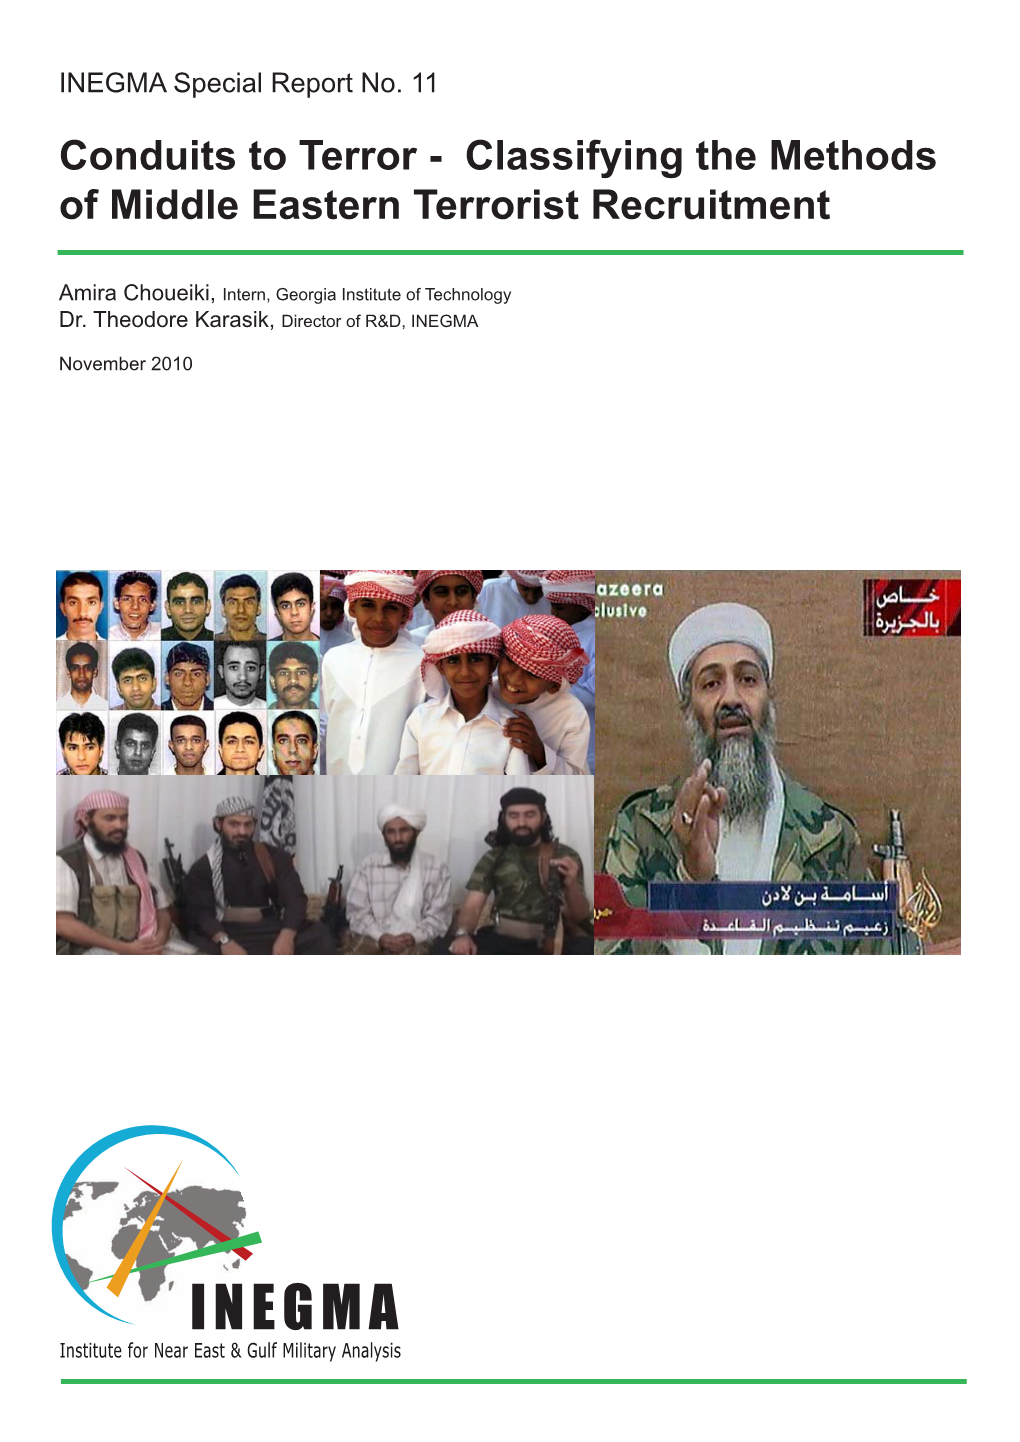 Classifying the Methods of Middle Eastern Terrorist Recruitment